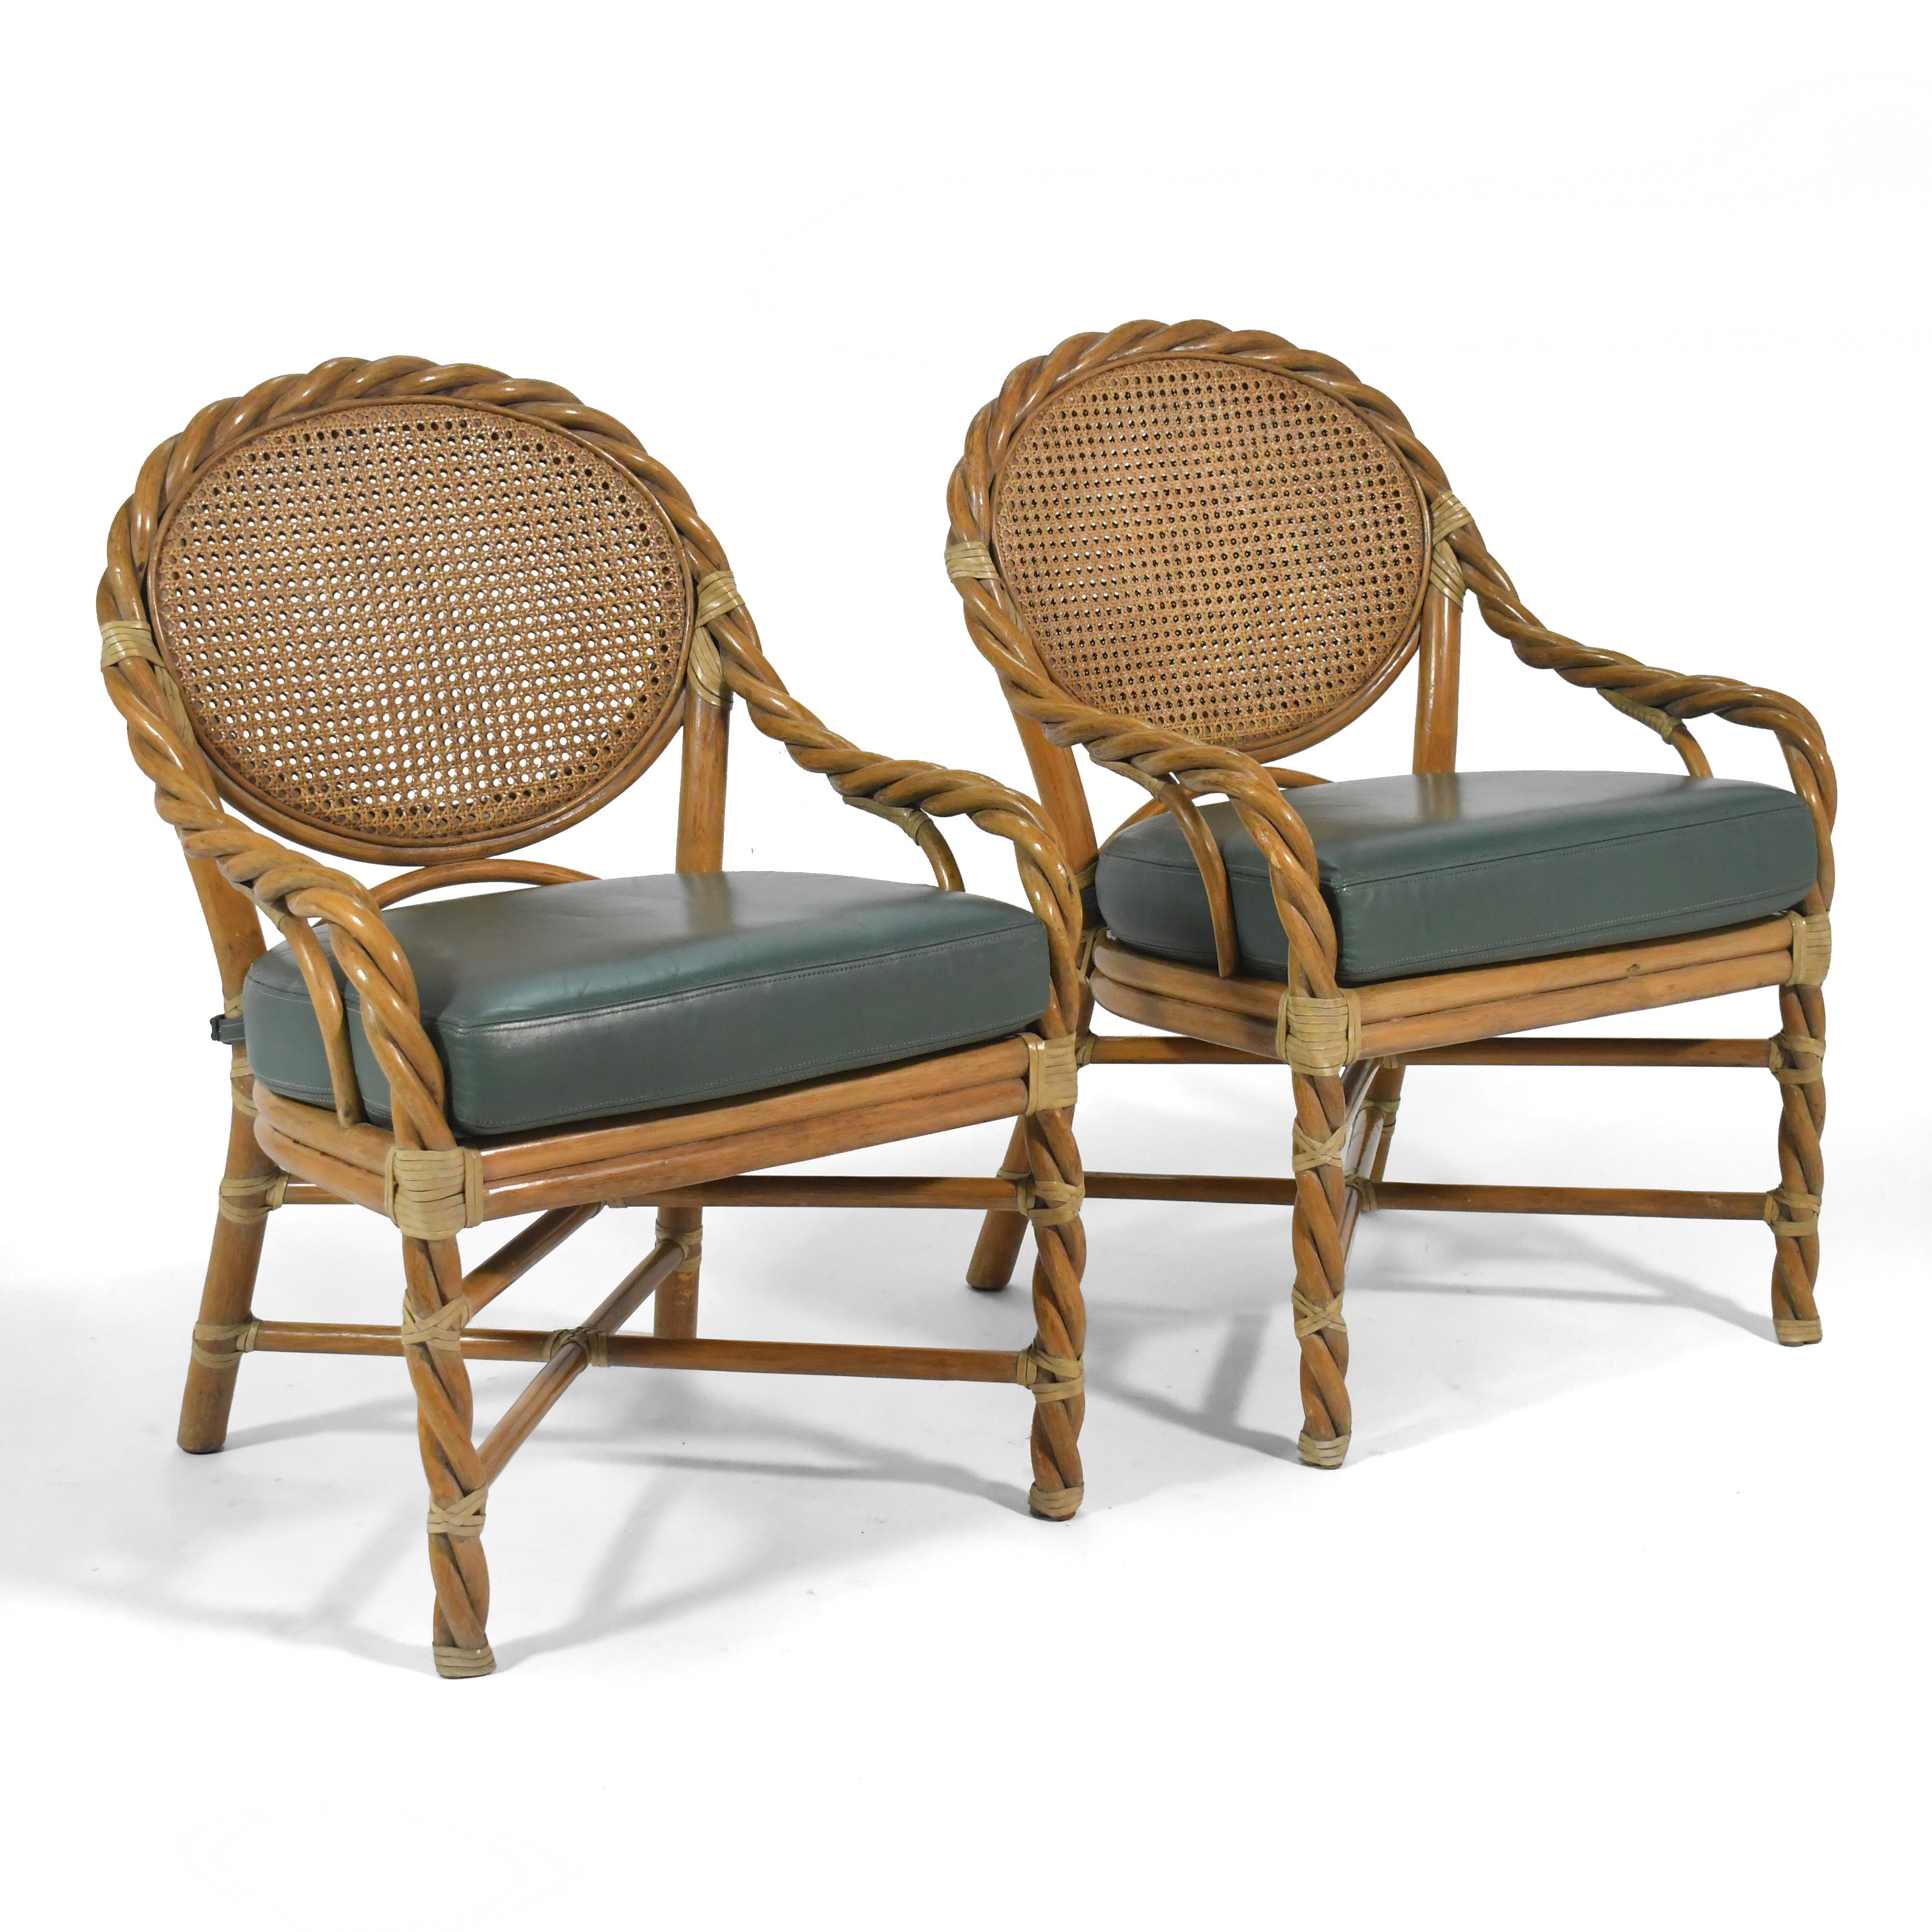 This beautiful pair of lounge chairs by McGuire take their sophisticated sculptural sensibility to another level. The front legs are made of twisted bands that wrap around the seat back in an undulating fashion emphasizing the strength and